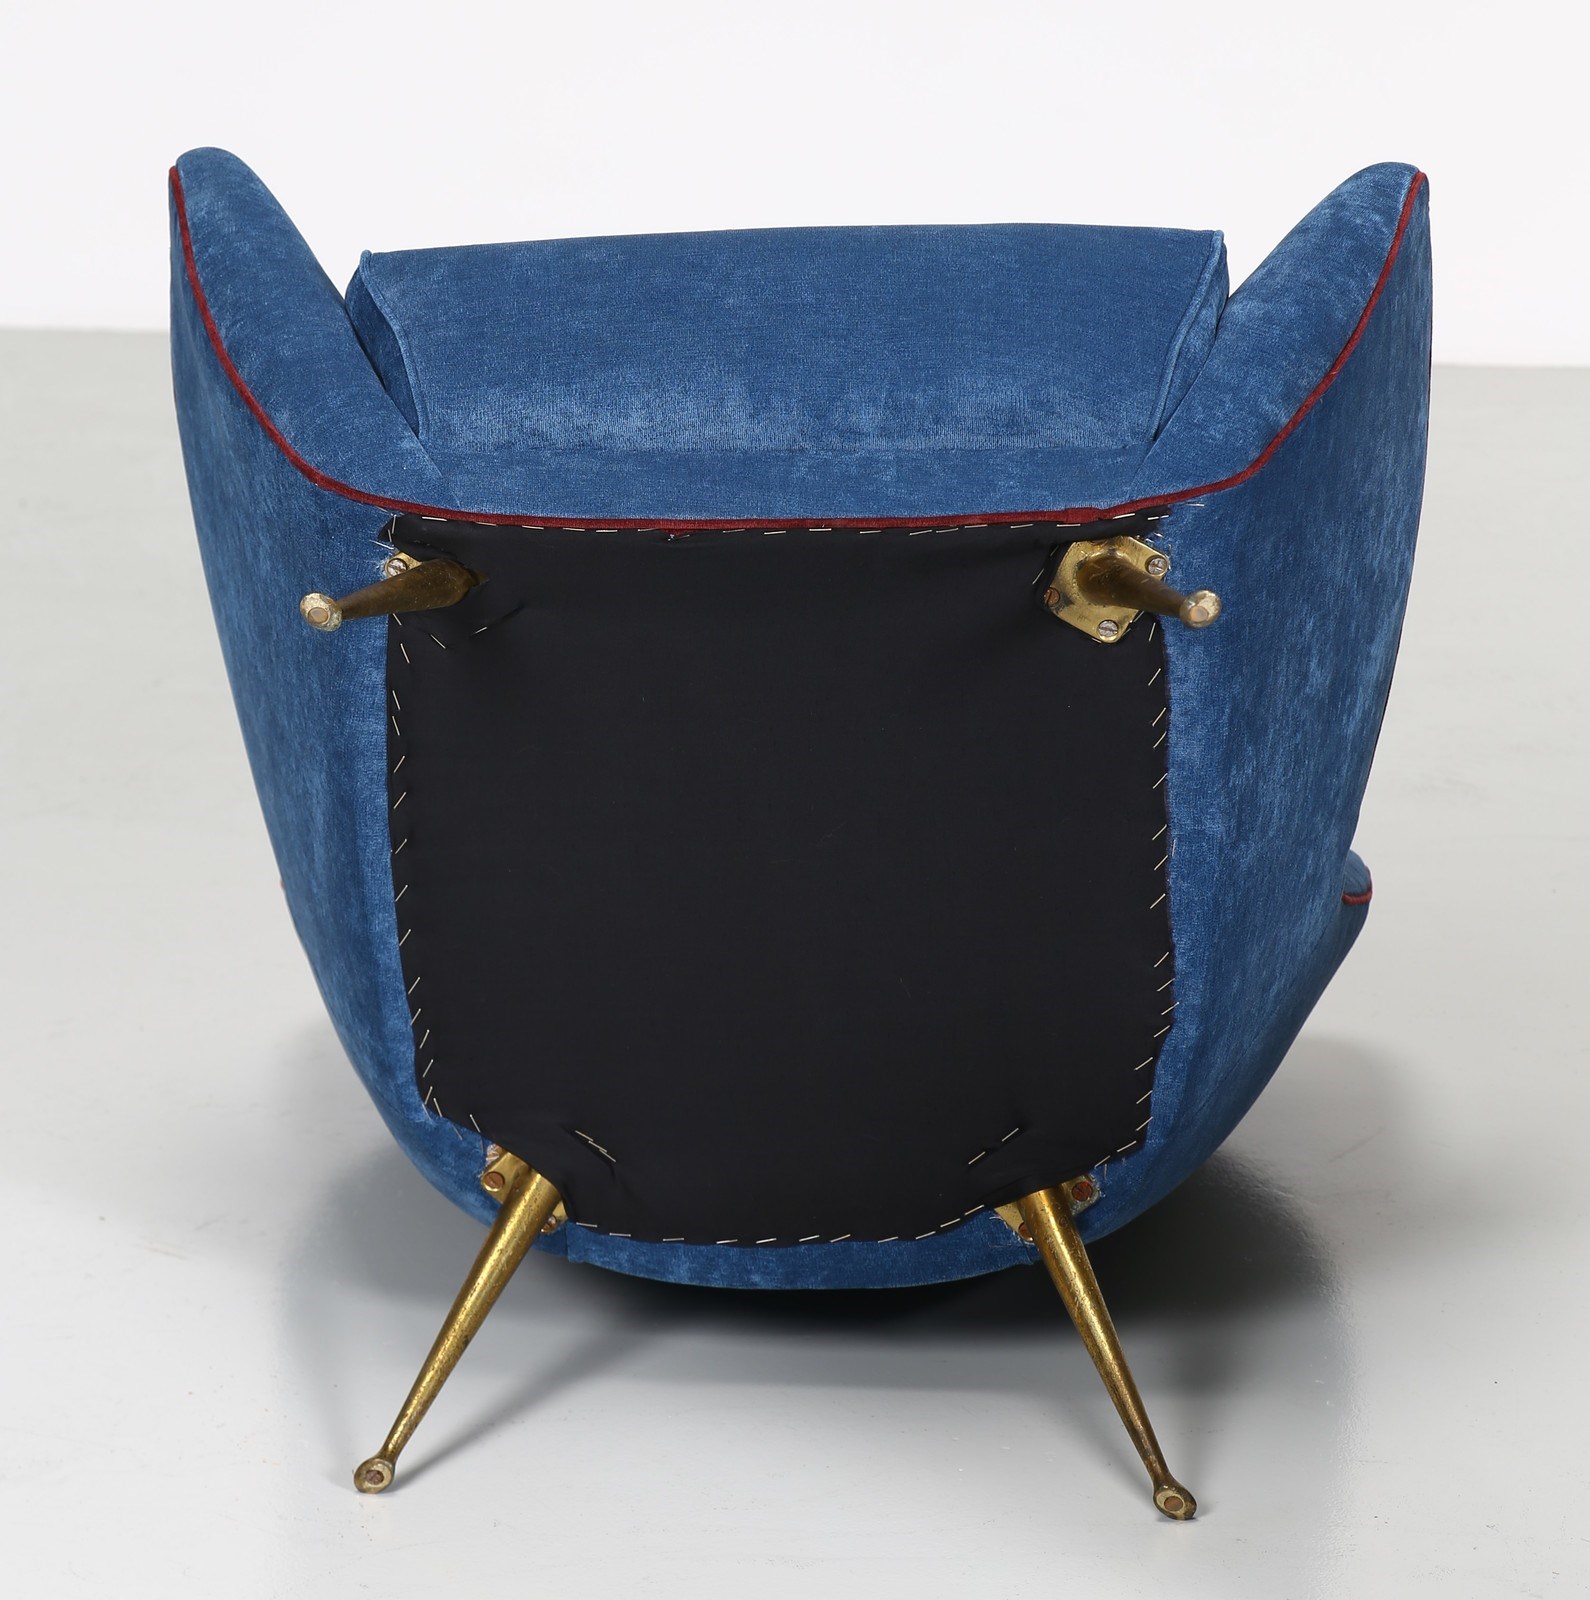 MELCHIORRE BEGA Attributed to. Pair of armchairs. - Image 6 of 7